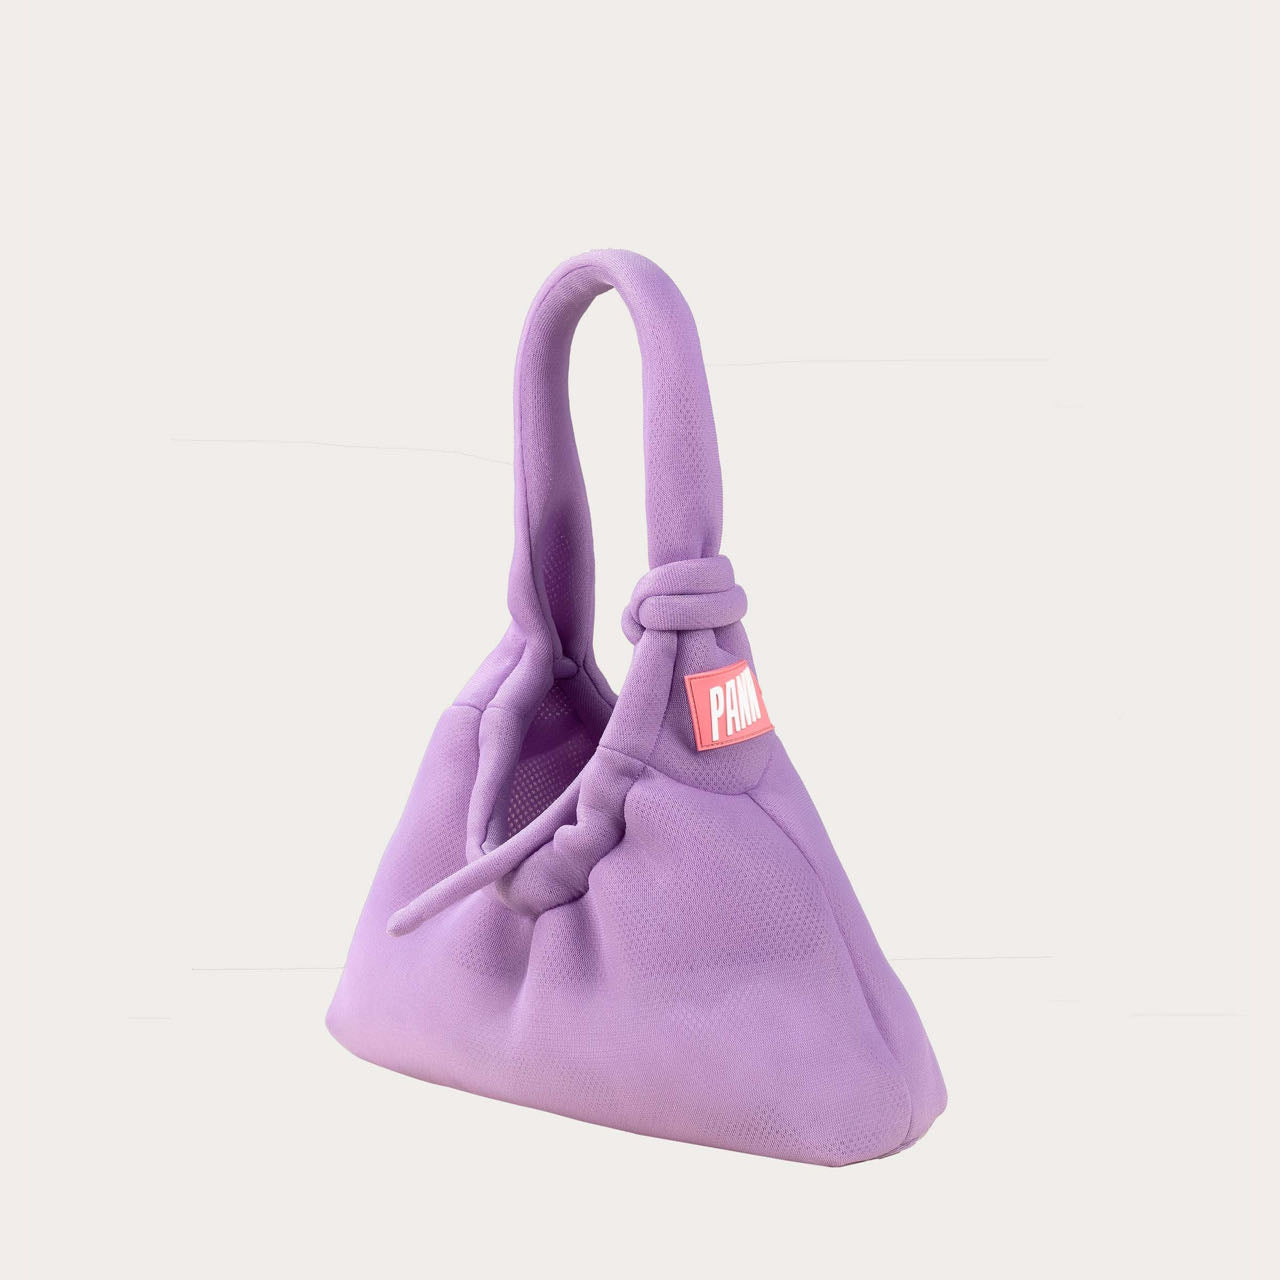 Everyday Carry Bag Small in Lavendar